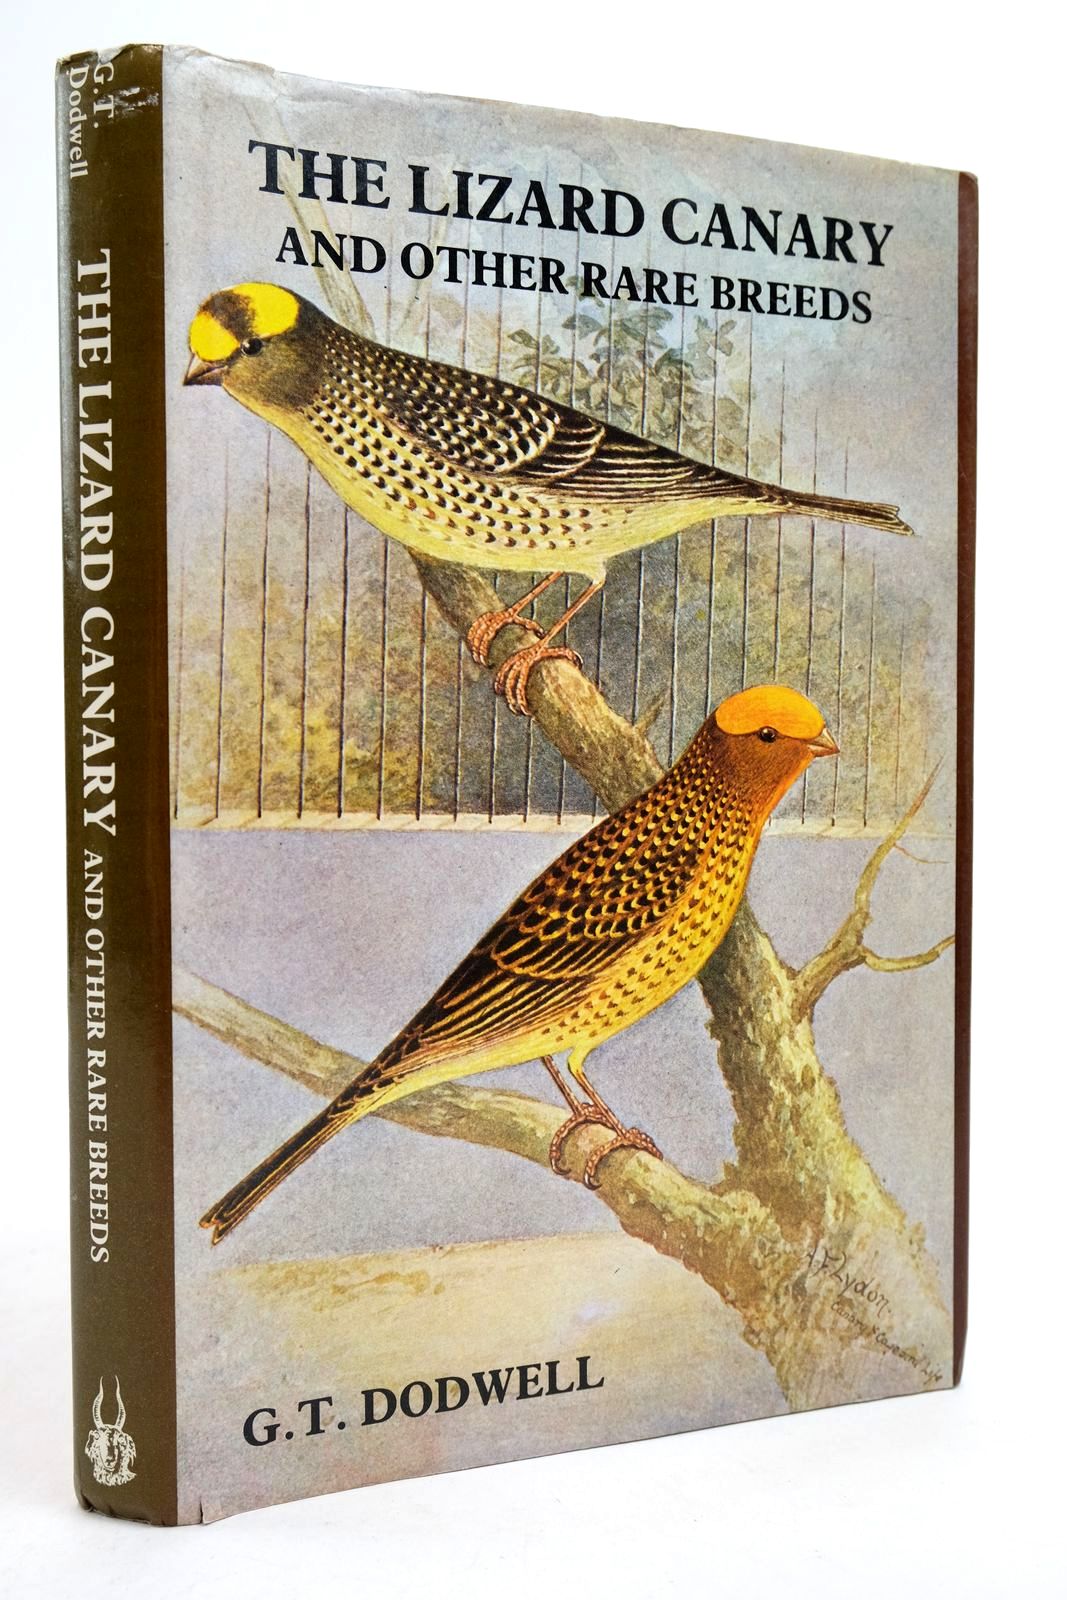 Photo of THE LIZARD CANARY AND OTHER RARE BREEDS written by Dodwell, G.T. published by Saiga Publishing Co. Ltd. (STOCK CODE: 2139672)  for sale by Stella & Rose's Books